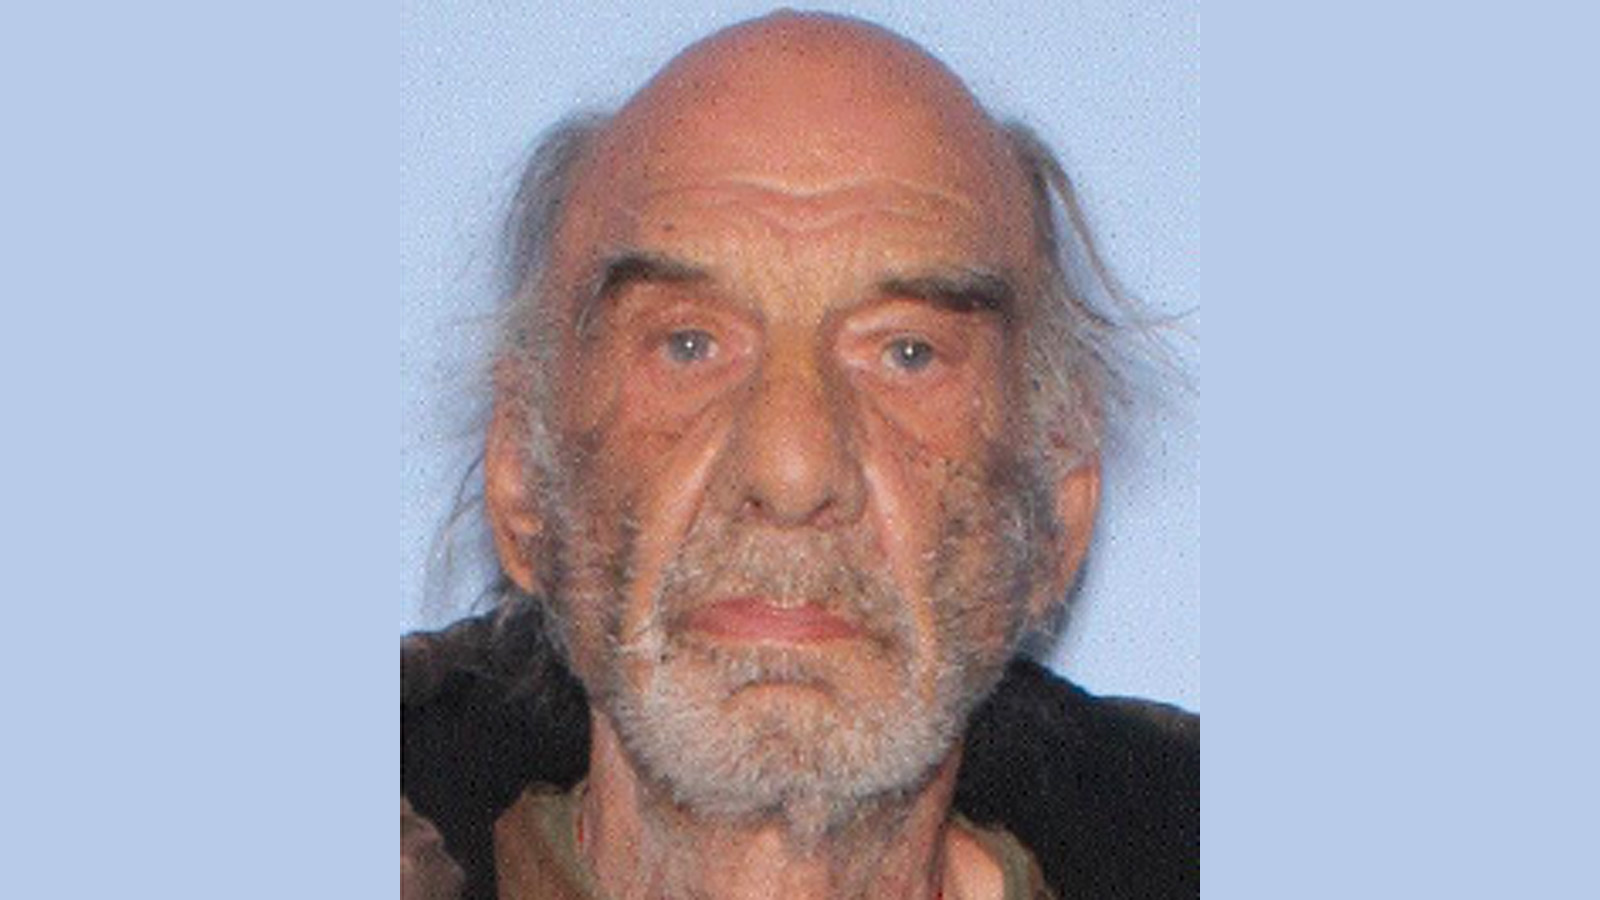 Silver Alert issued for 81-year-old Phoenix man who left home on foot